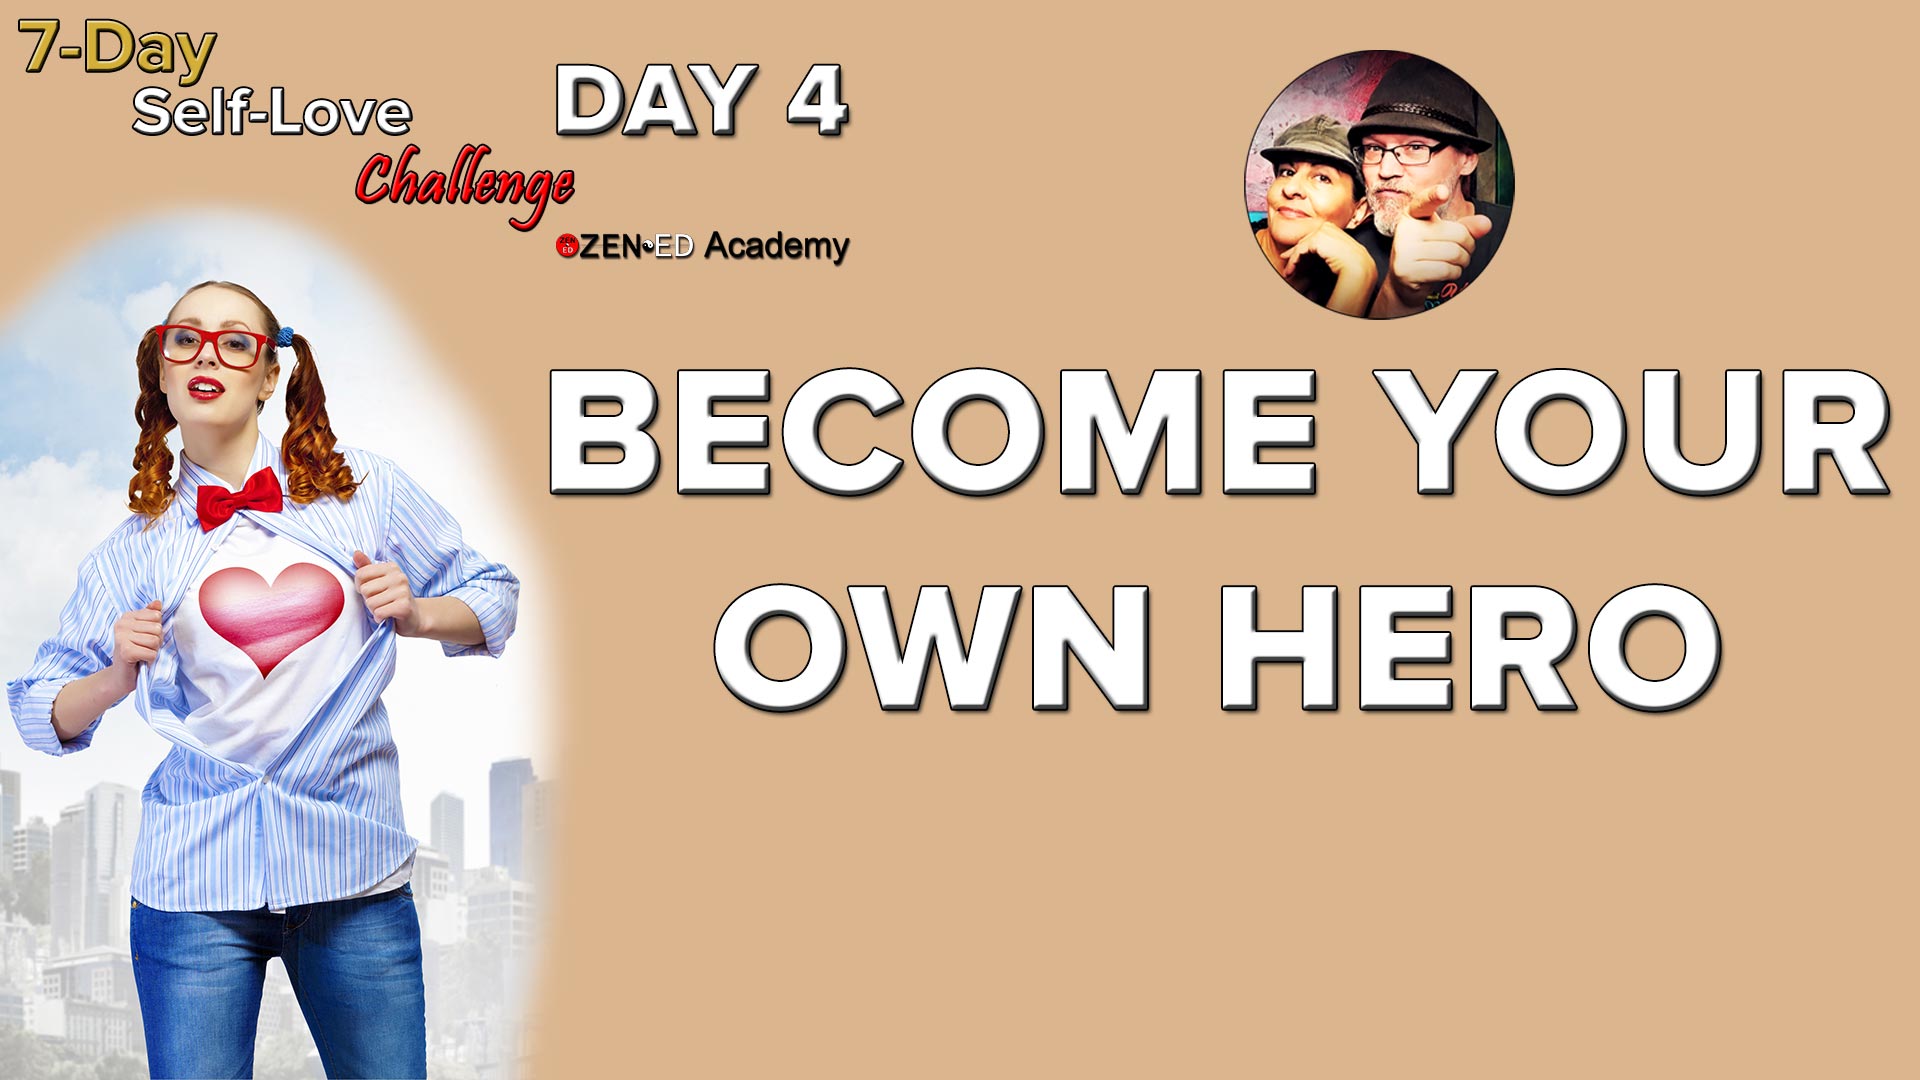 Thumbnail Day 4: Become Your Own Hero Zen Ed Academy's Free 7-Day Self-Love Challenge